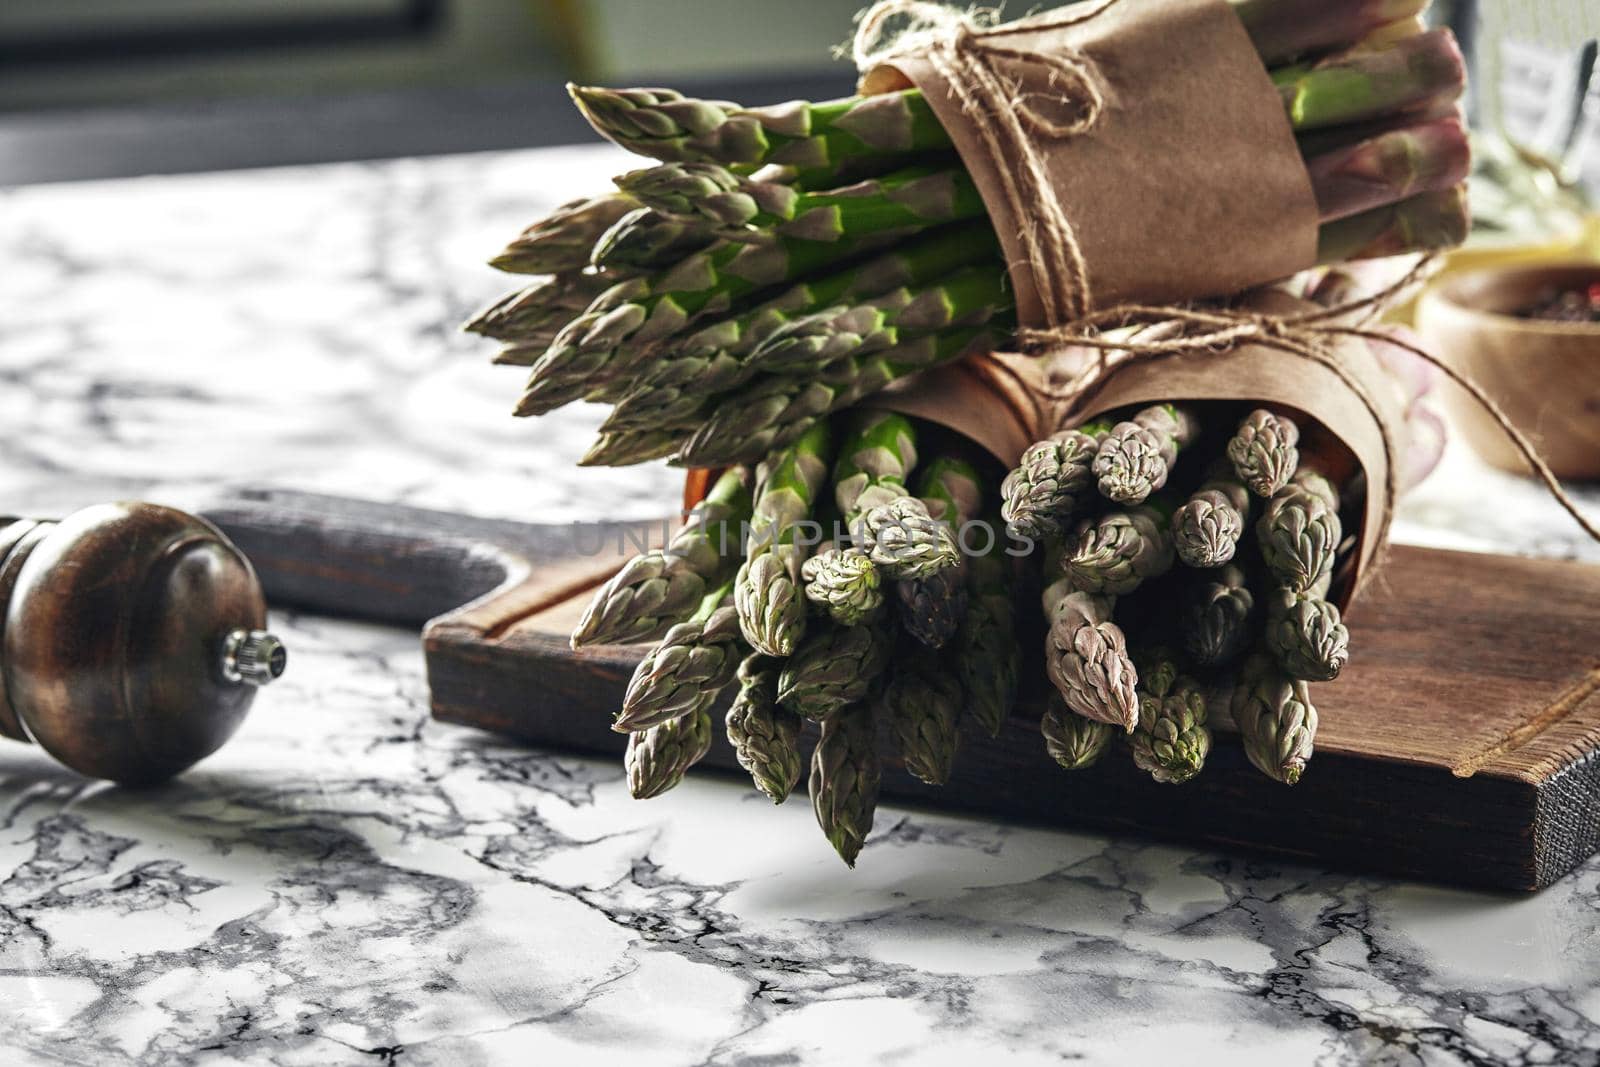 Bunch of an edible, ripe sprouts of asparagus on a wooden board, marble background. Fresh, green vegetables. Healthy food. Spring harvest, agricultural farming concept.